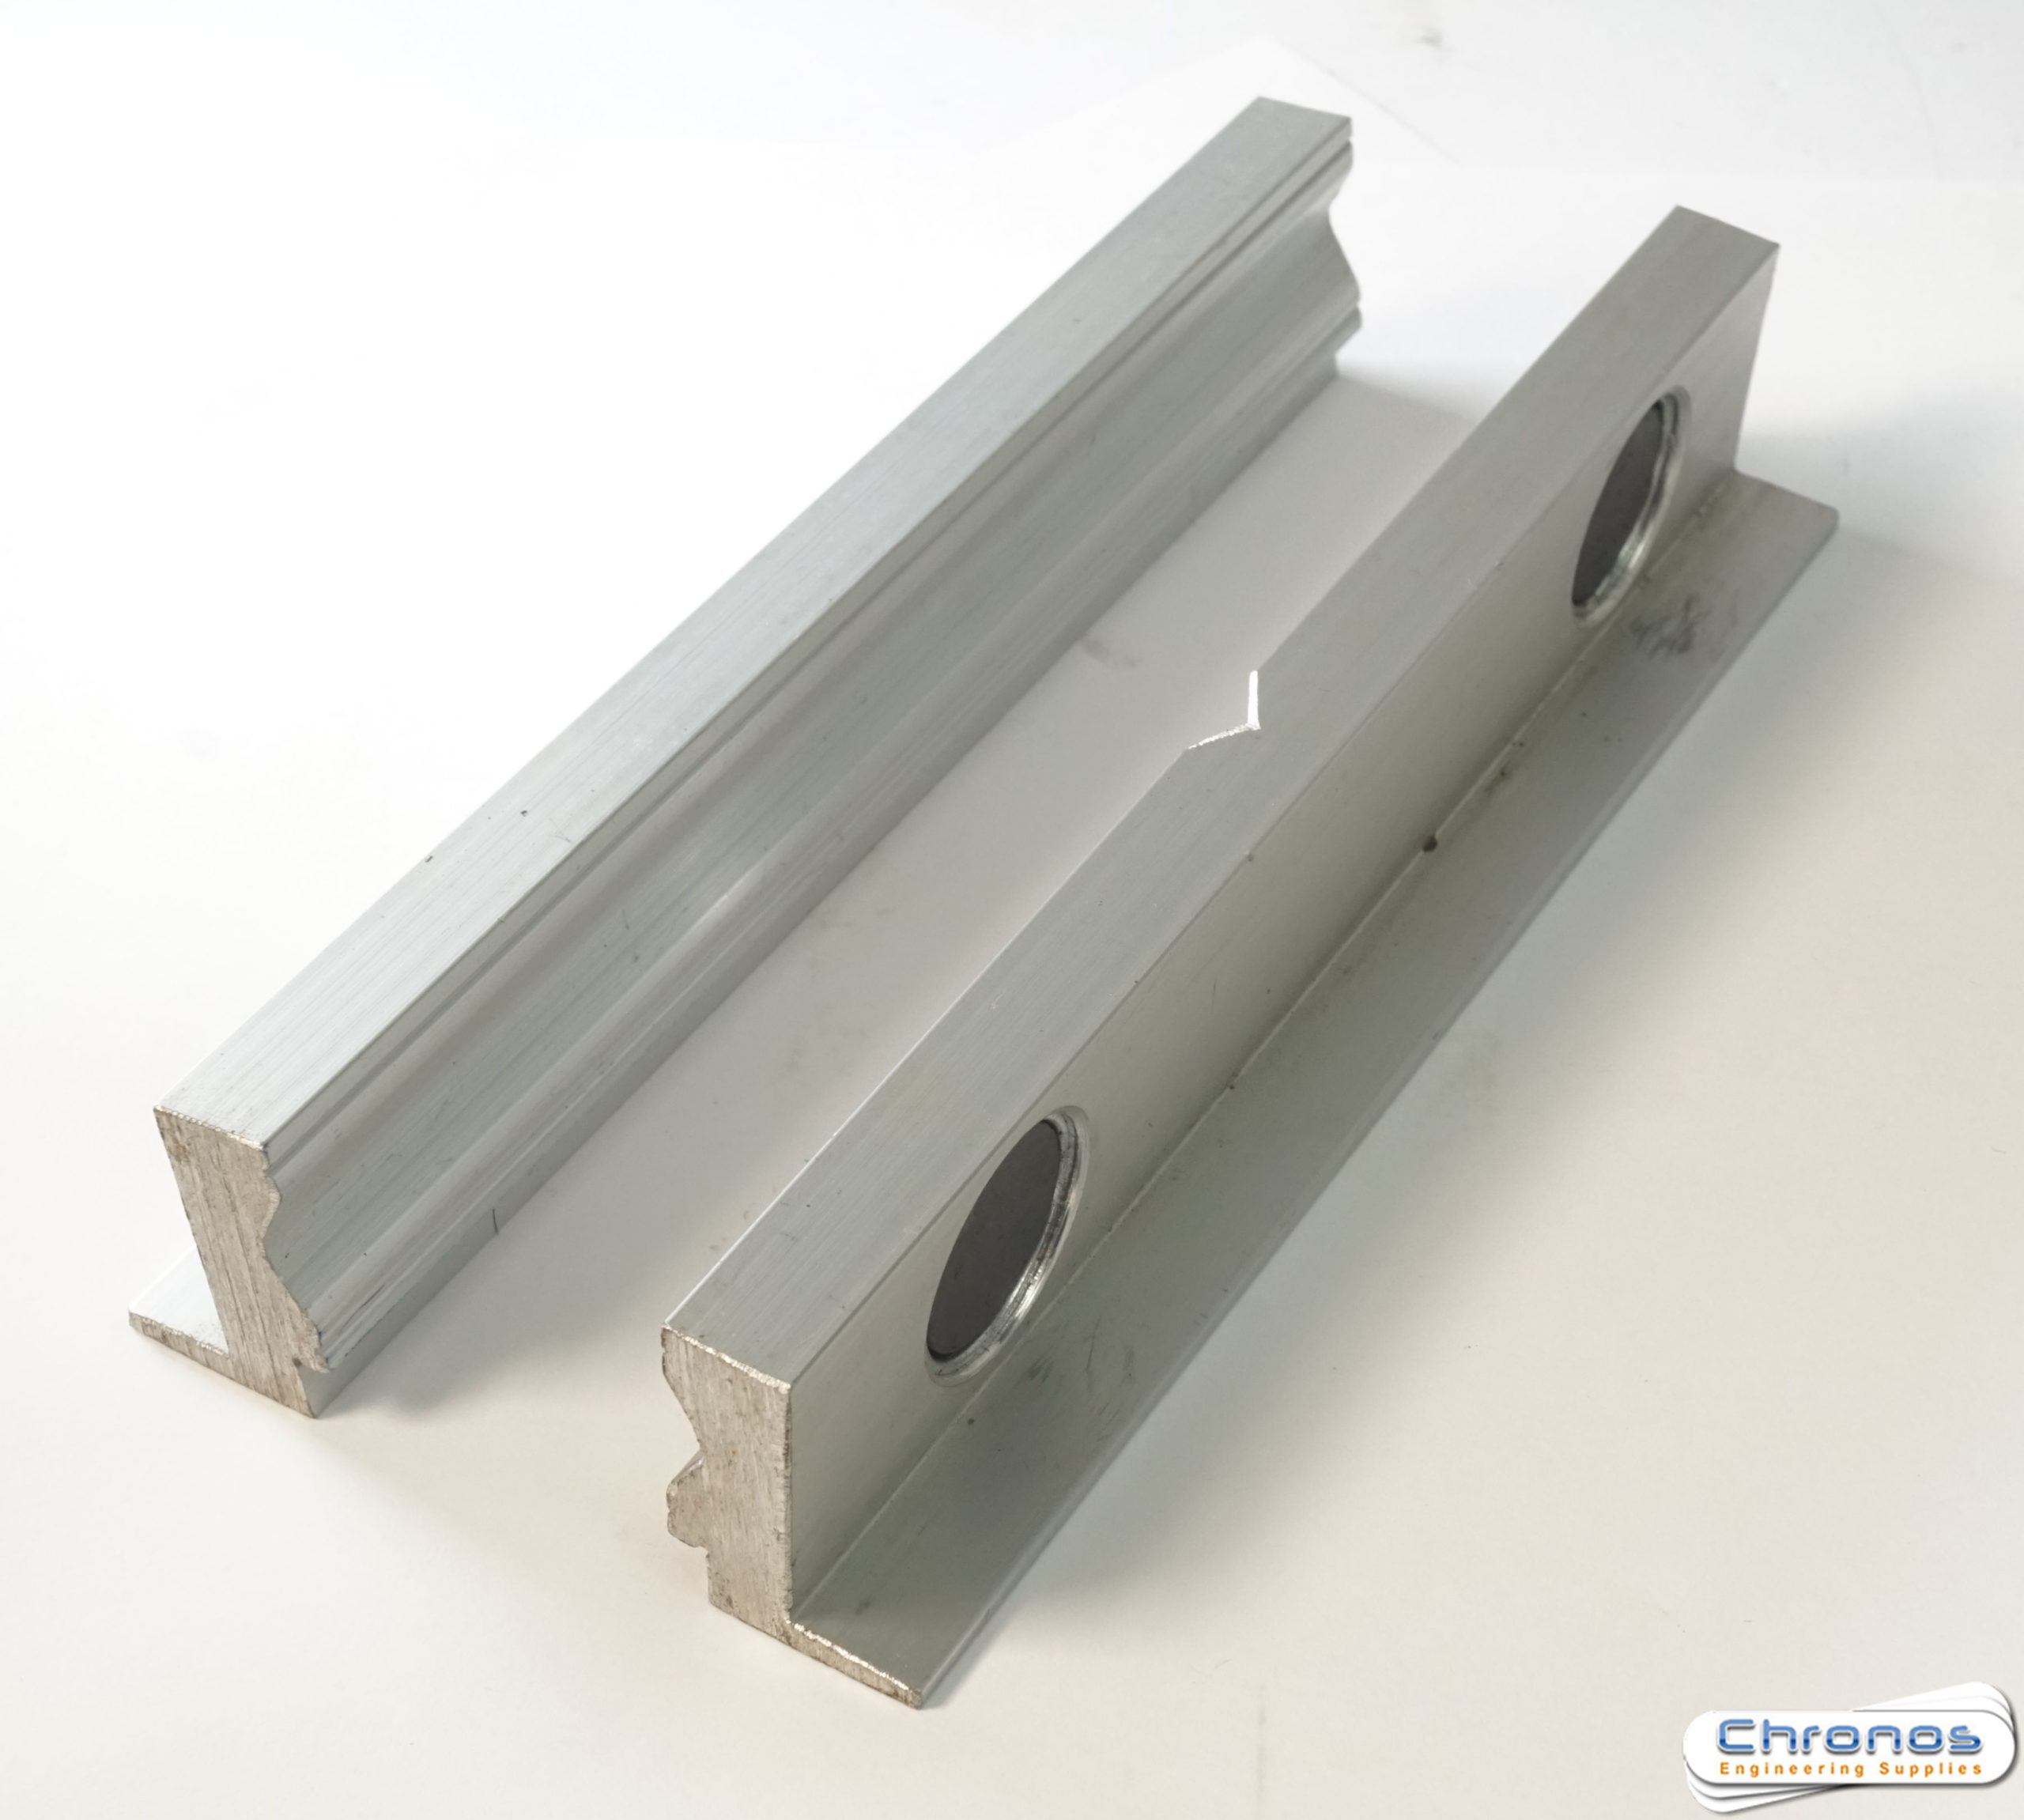 Pair of 150 mm Magnetic Fibre Vice Jaws 